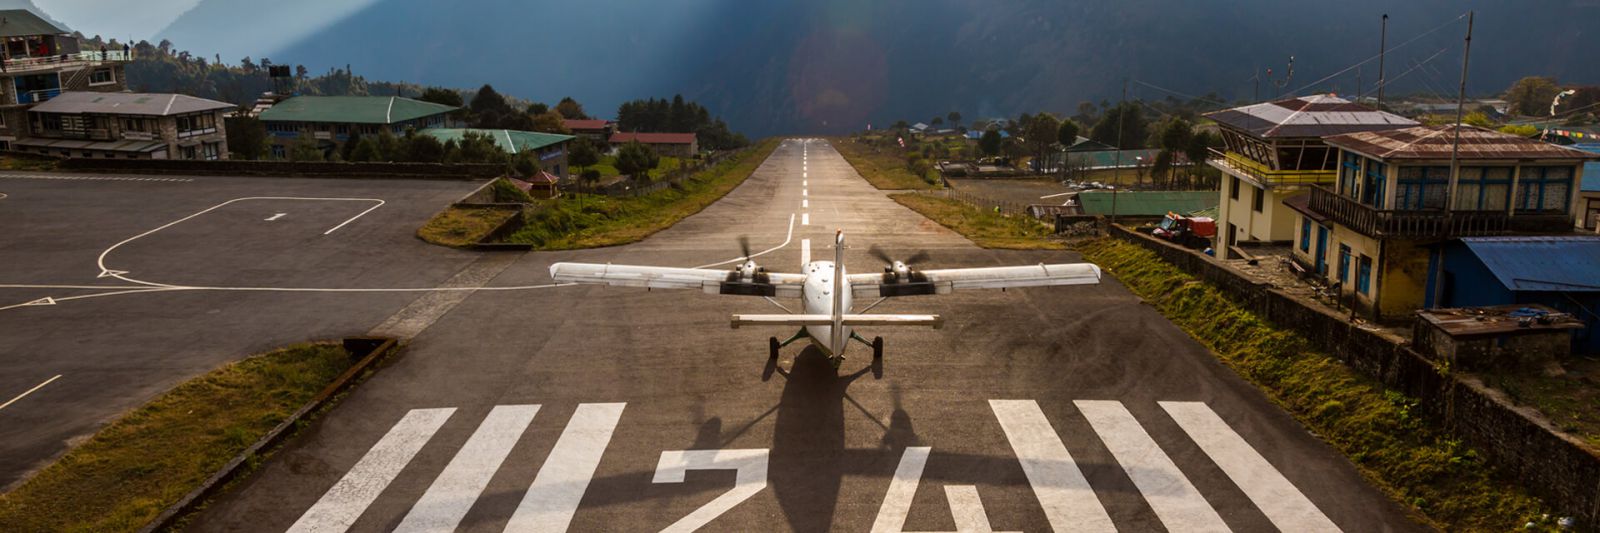 Airplane preparing for take off on Short Runway of small Airport ending at deep Mountains in Sunset Light